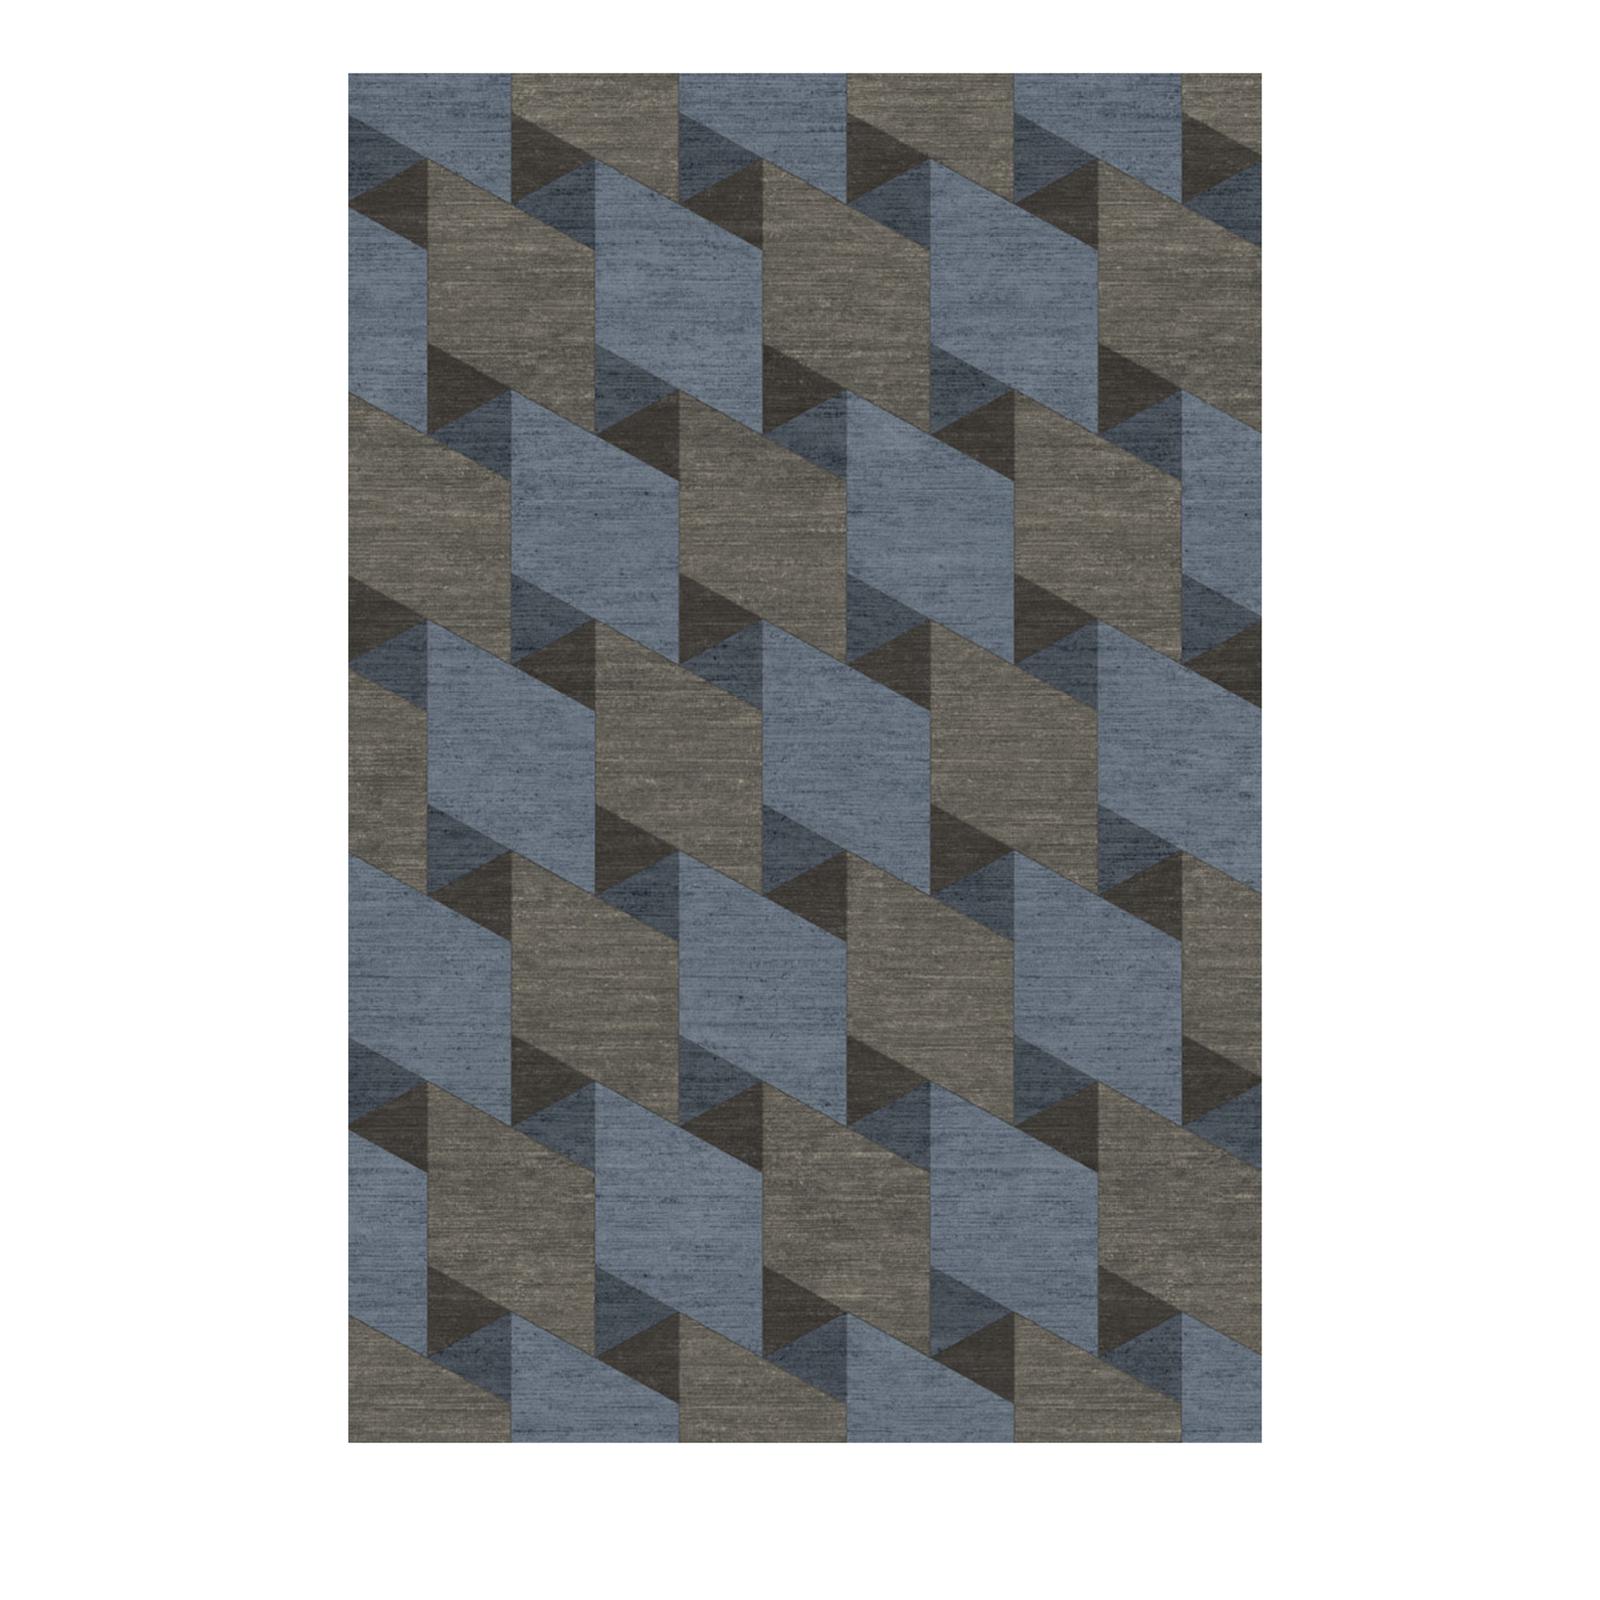 Simple yet chic, this refined rug will suit any modern or traditional style. The piece showcases a precise, three-dimensional geometric design formed with alternating rows of large royal-blue and ash-gray squares and smaller, beveled black squares.